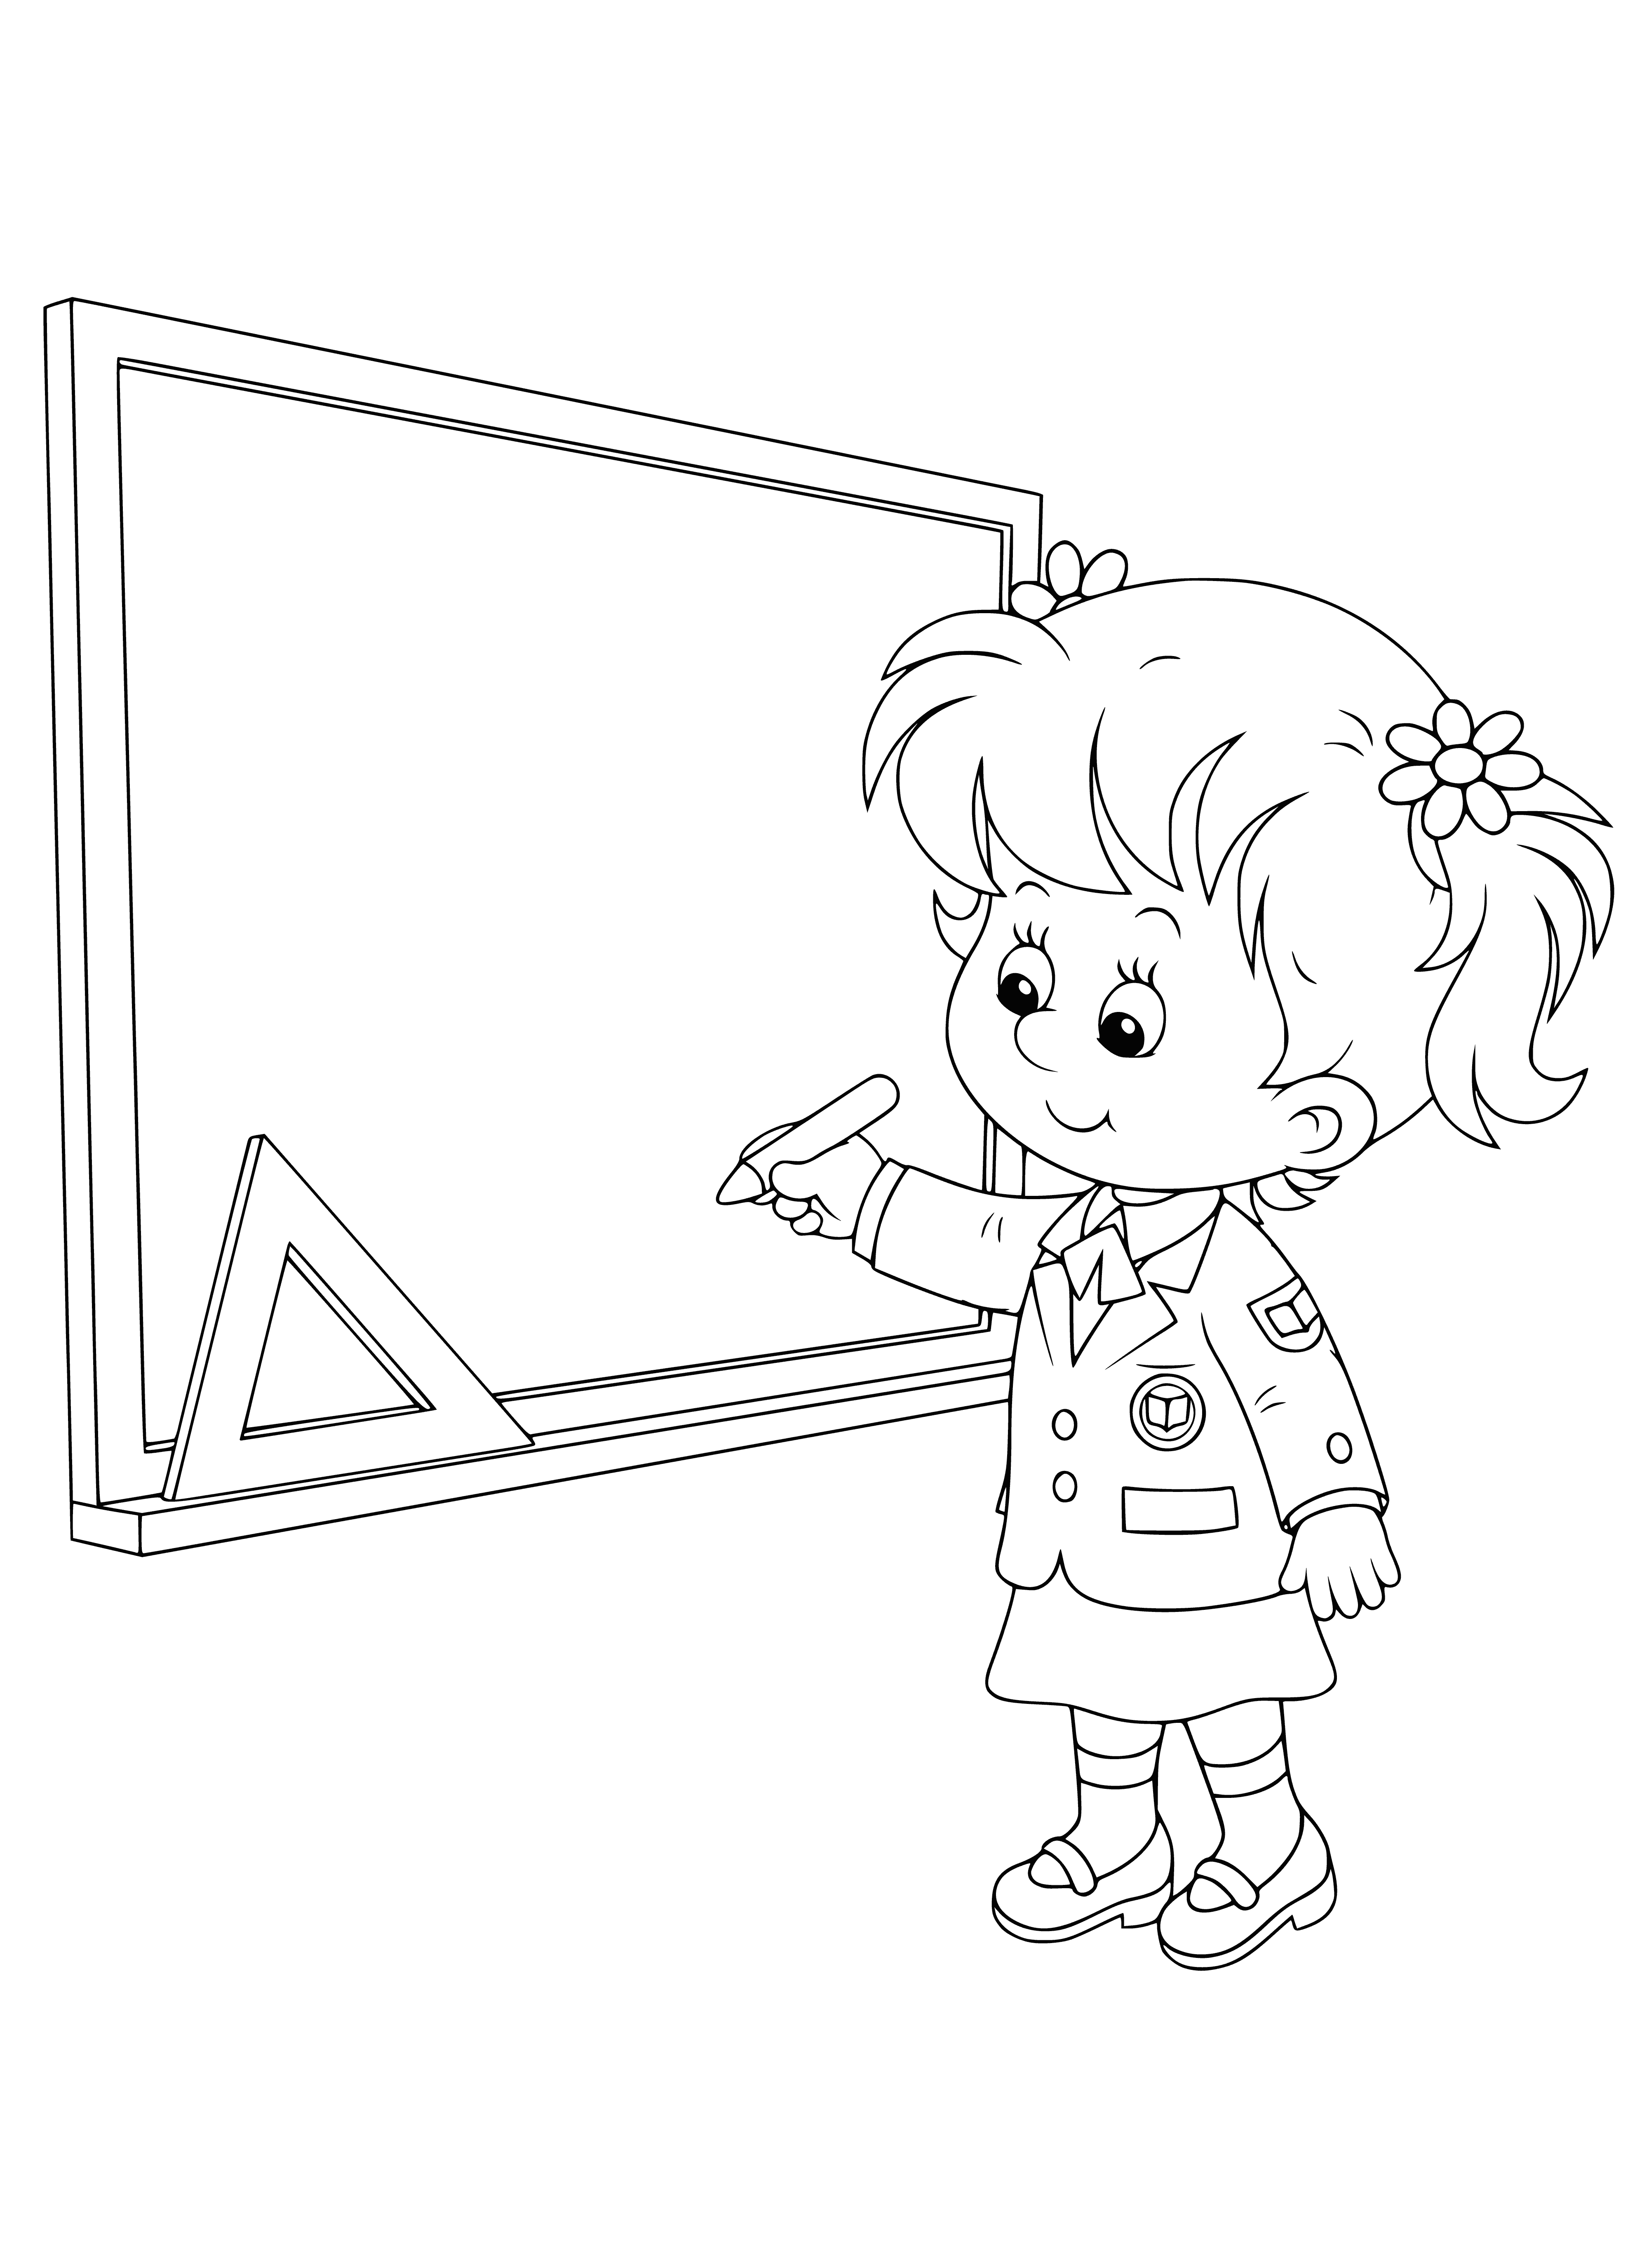 Girl at the blackboard coloring page